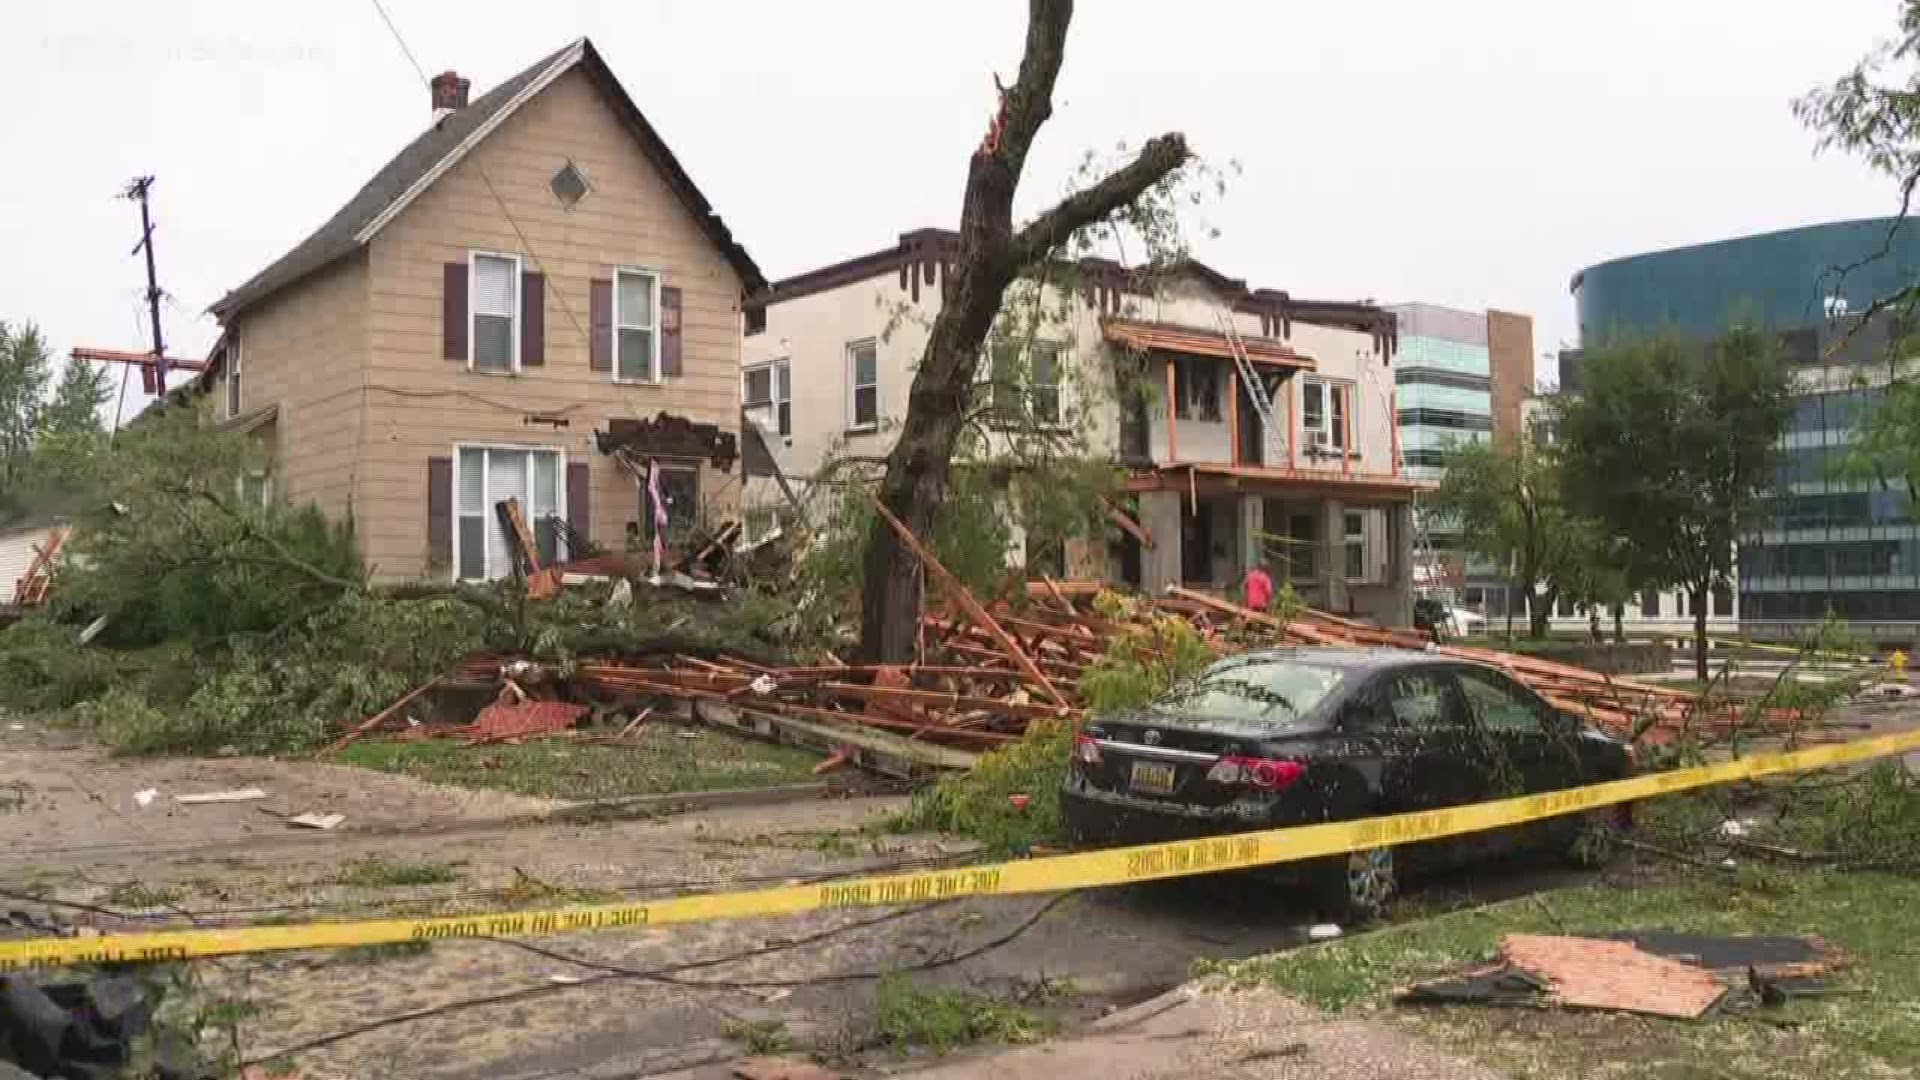 One of the hardest hit areas in the severe storms Wednesday night was right in Grand Rapids, in the Belknap neighborhood. The roof to an apartment building was blown off. Trees fell through homes. Power lines were brought down. Residents are now out trying to survey the damage and figure out what's next.